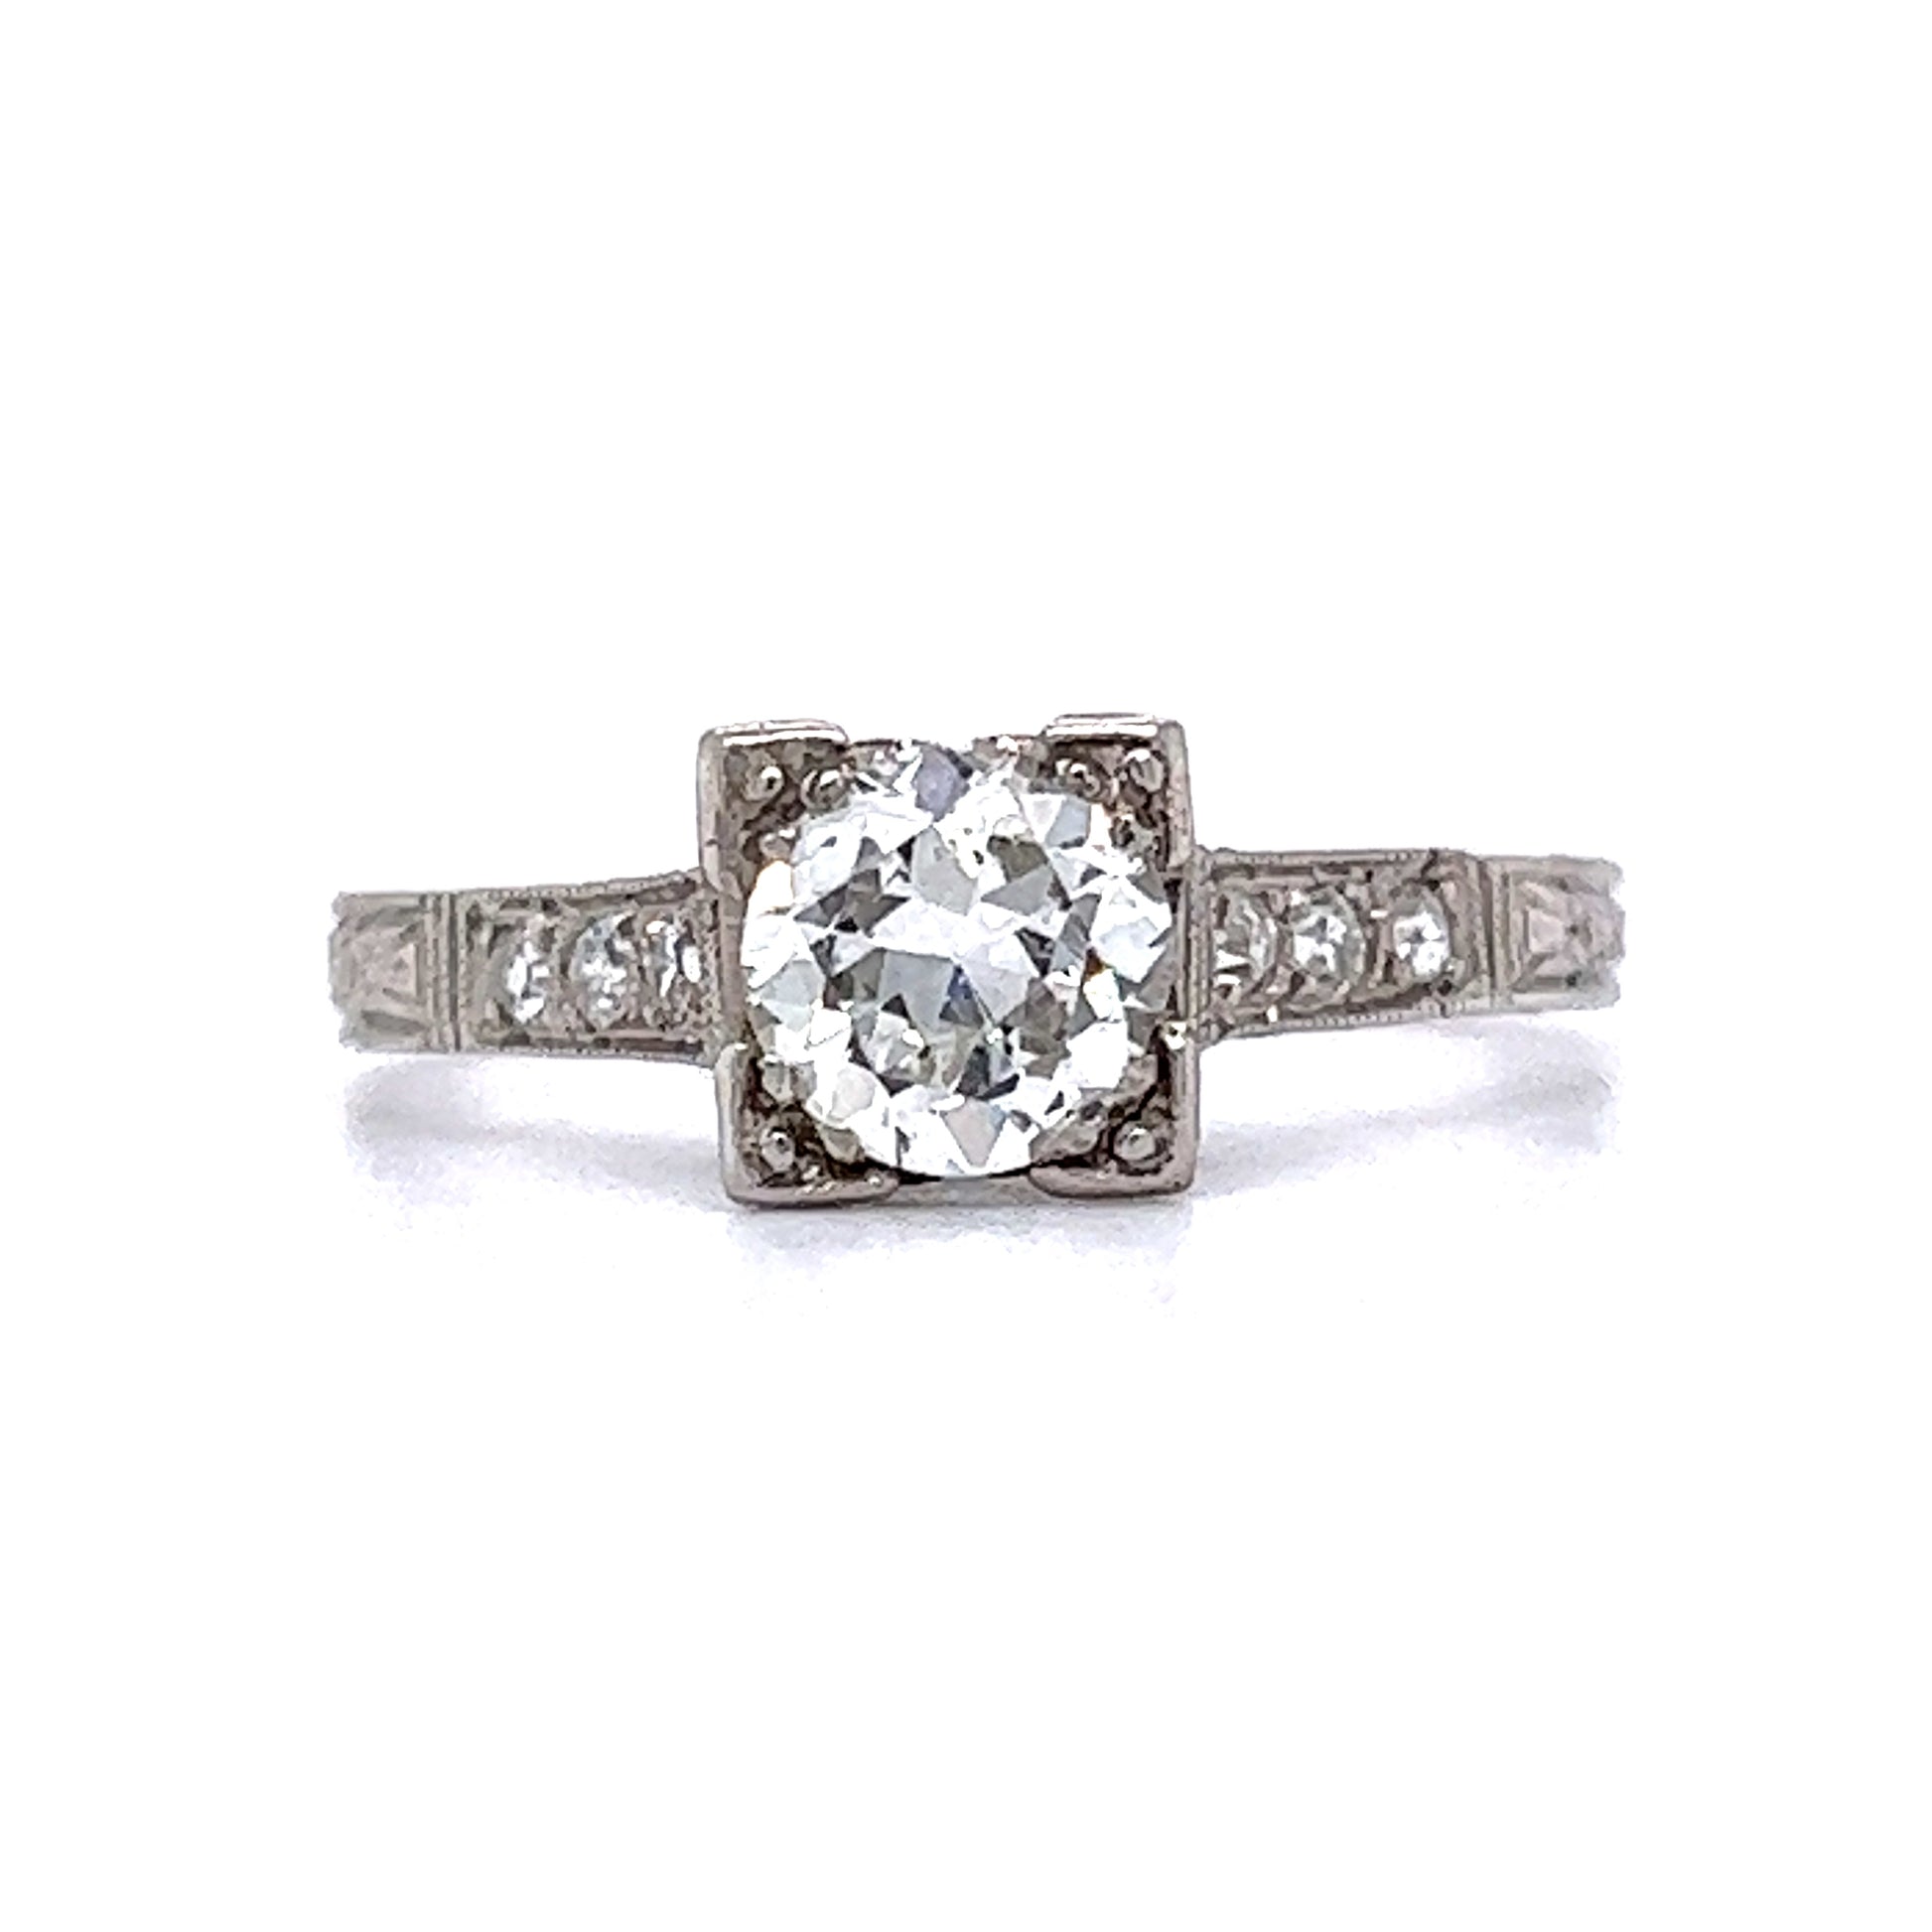 .70 Old European Cut Diamond Engagement Ring in PlatinumComposition: PlatinumRing Size: 7Total Diamond Weight: .79 ctTotal Gram Weight: 2.6 gInscription: 5% IRID PLAT